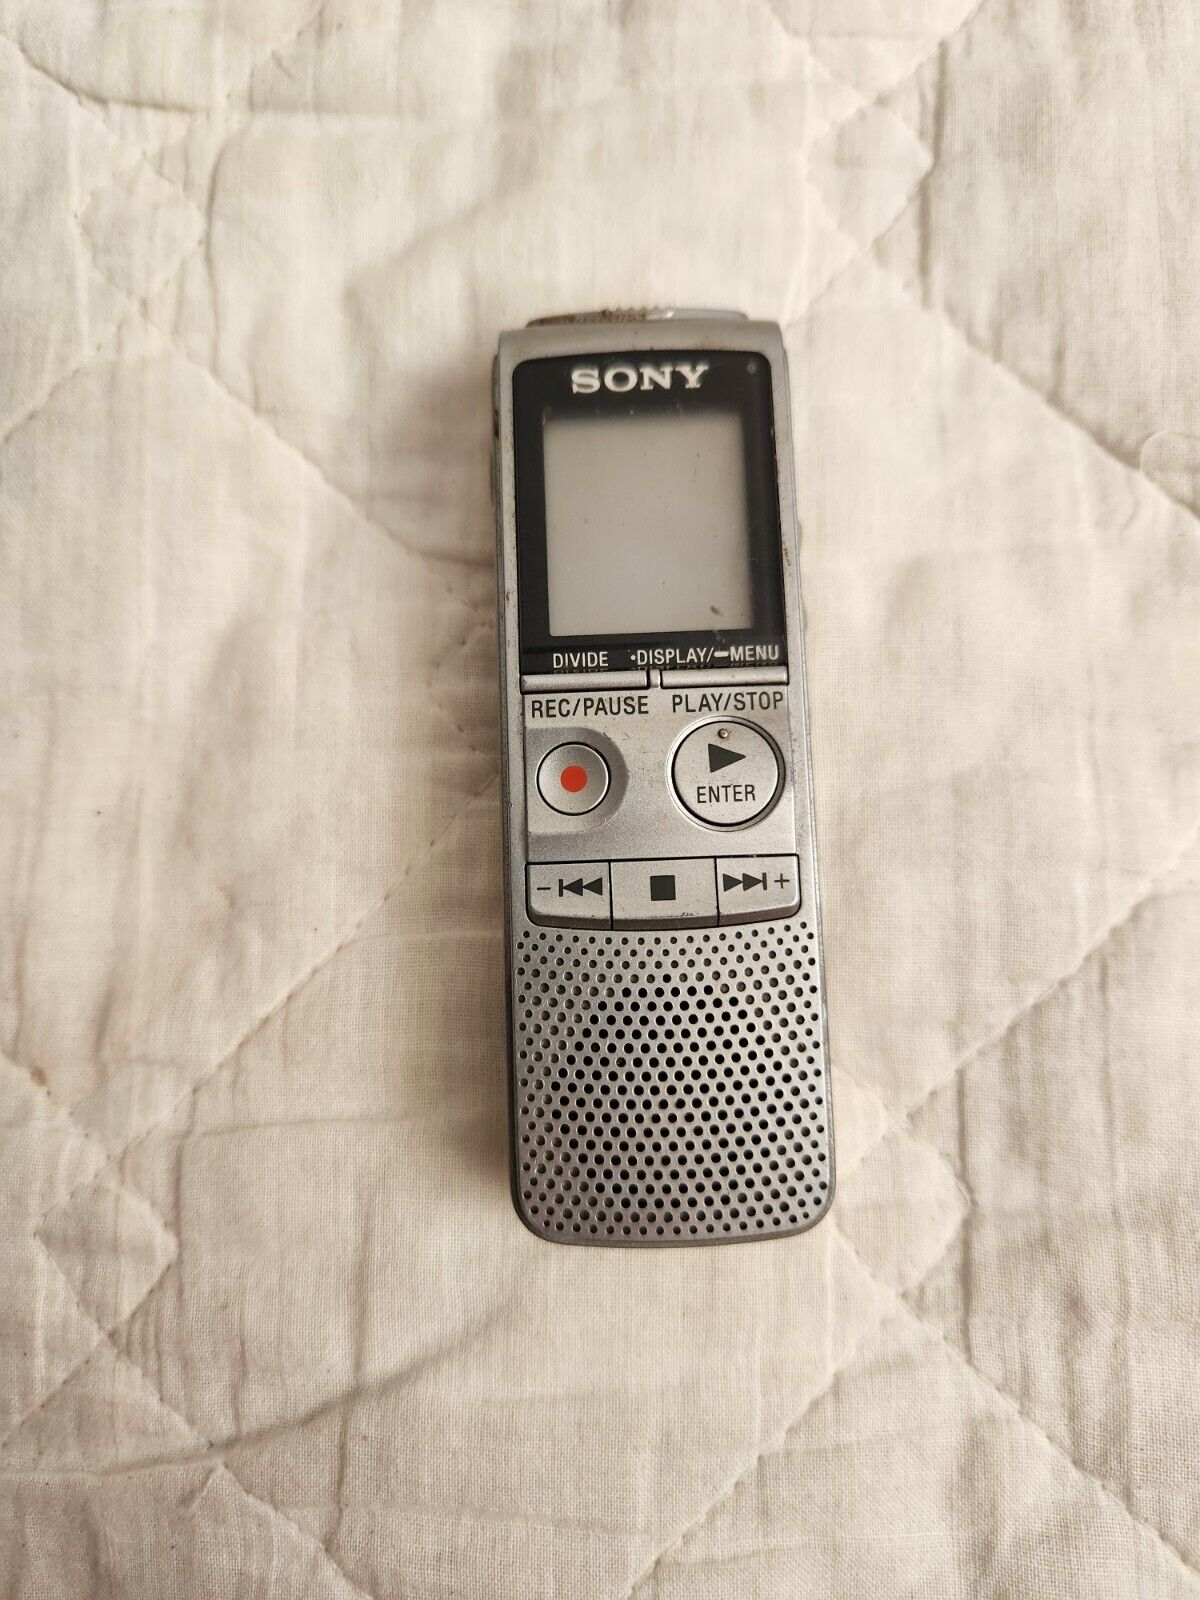 Vintage Sony ICD-BX700 Handheld Digital Voice IC Recorder Silver Tested Working